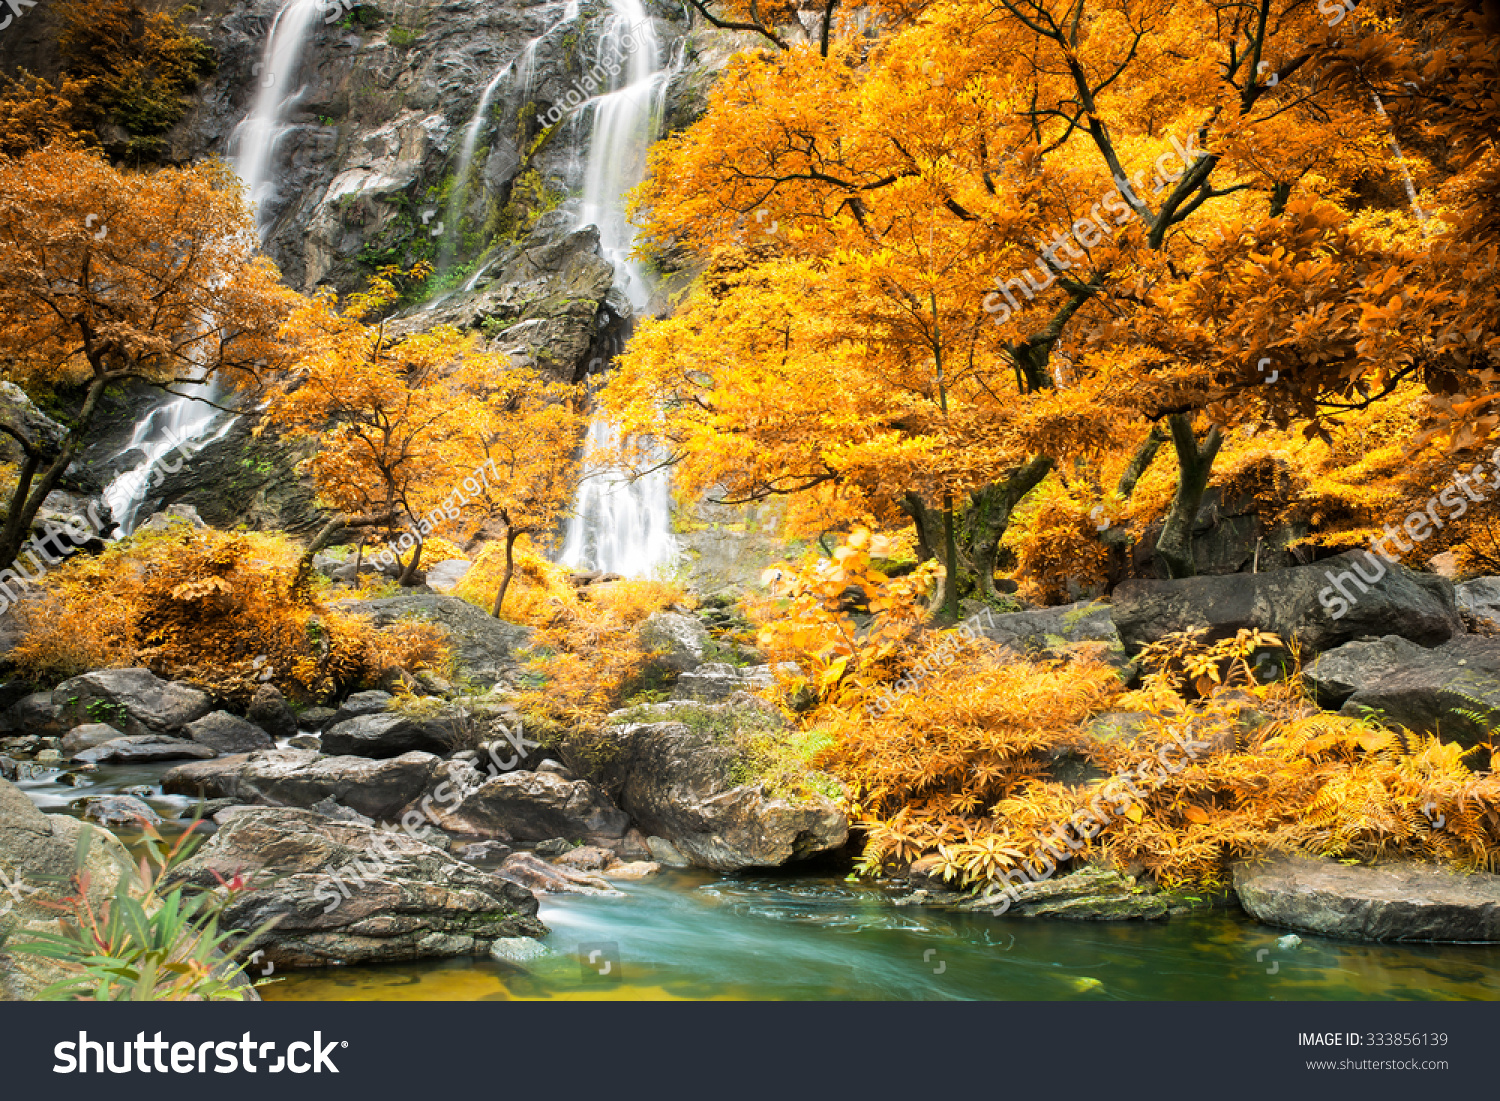 Amazing waterfall in colorful autumn forest  #333856139